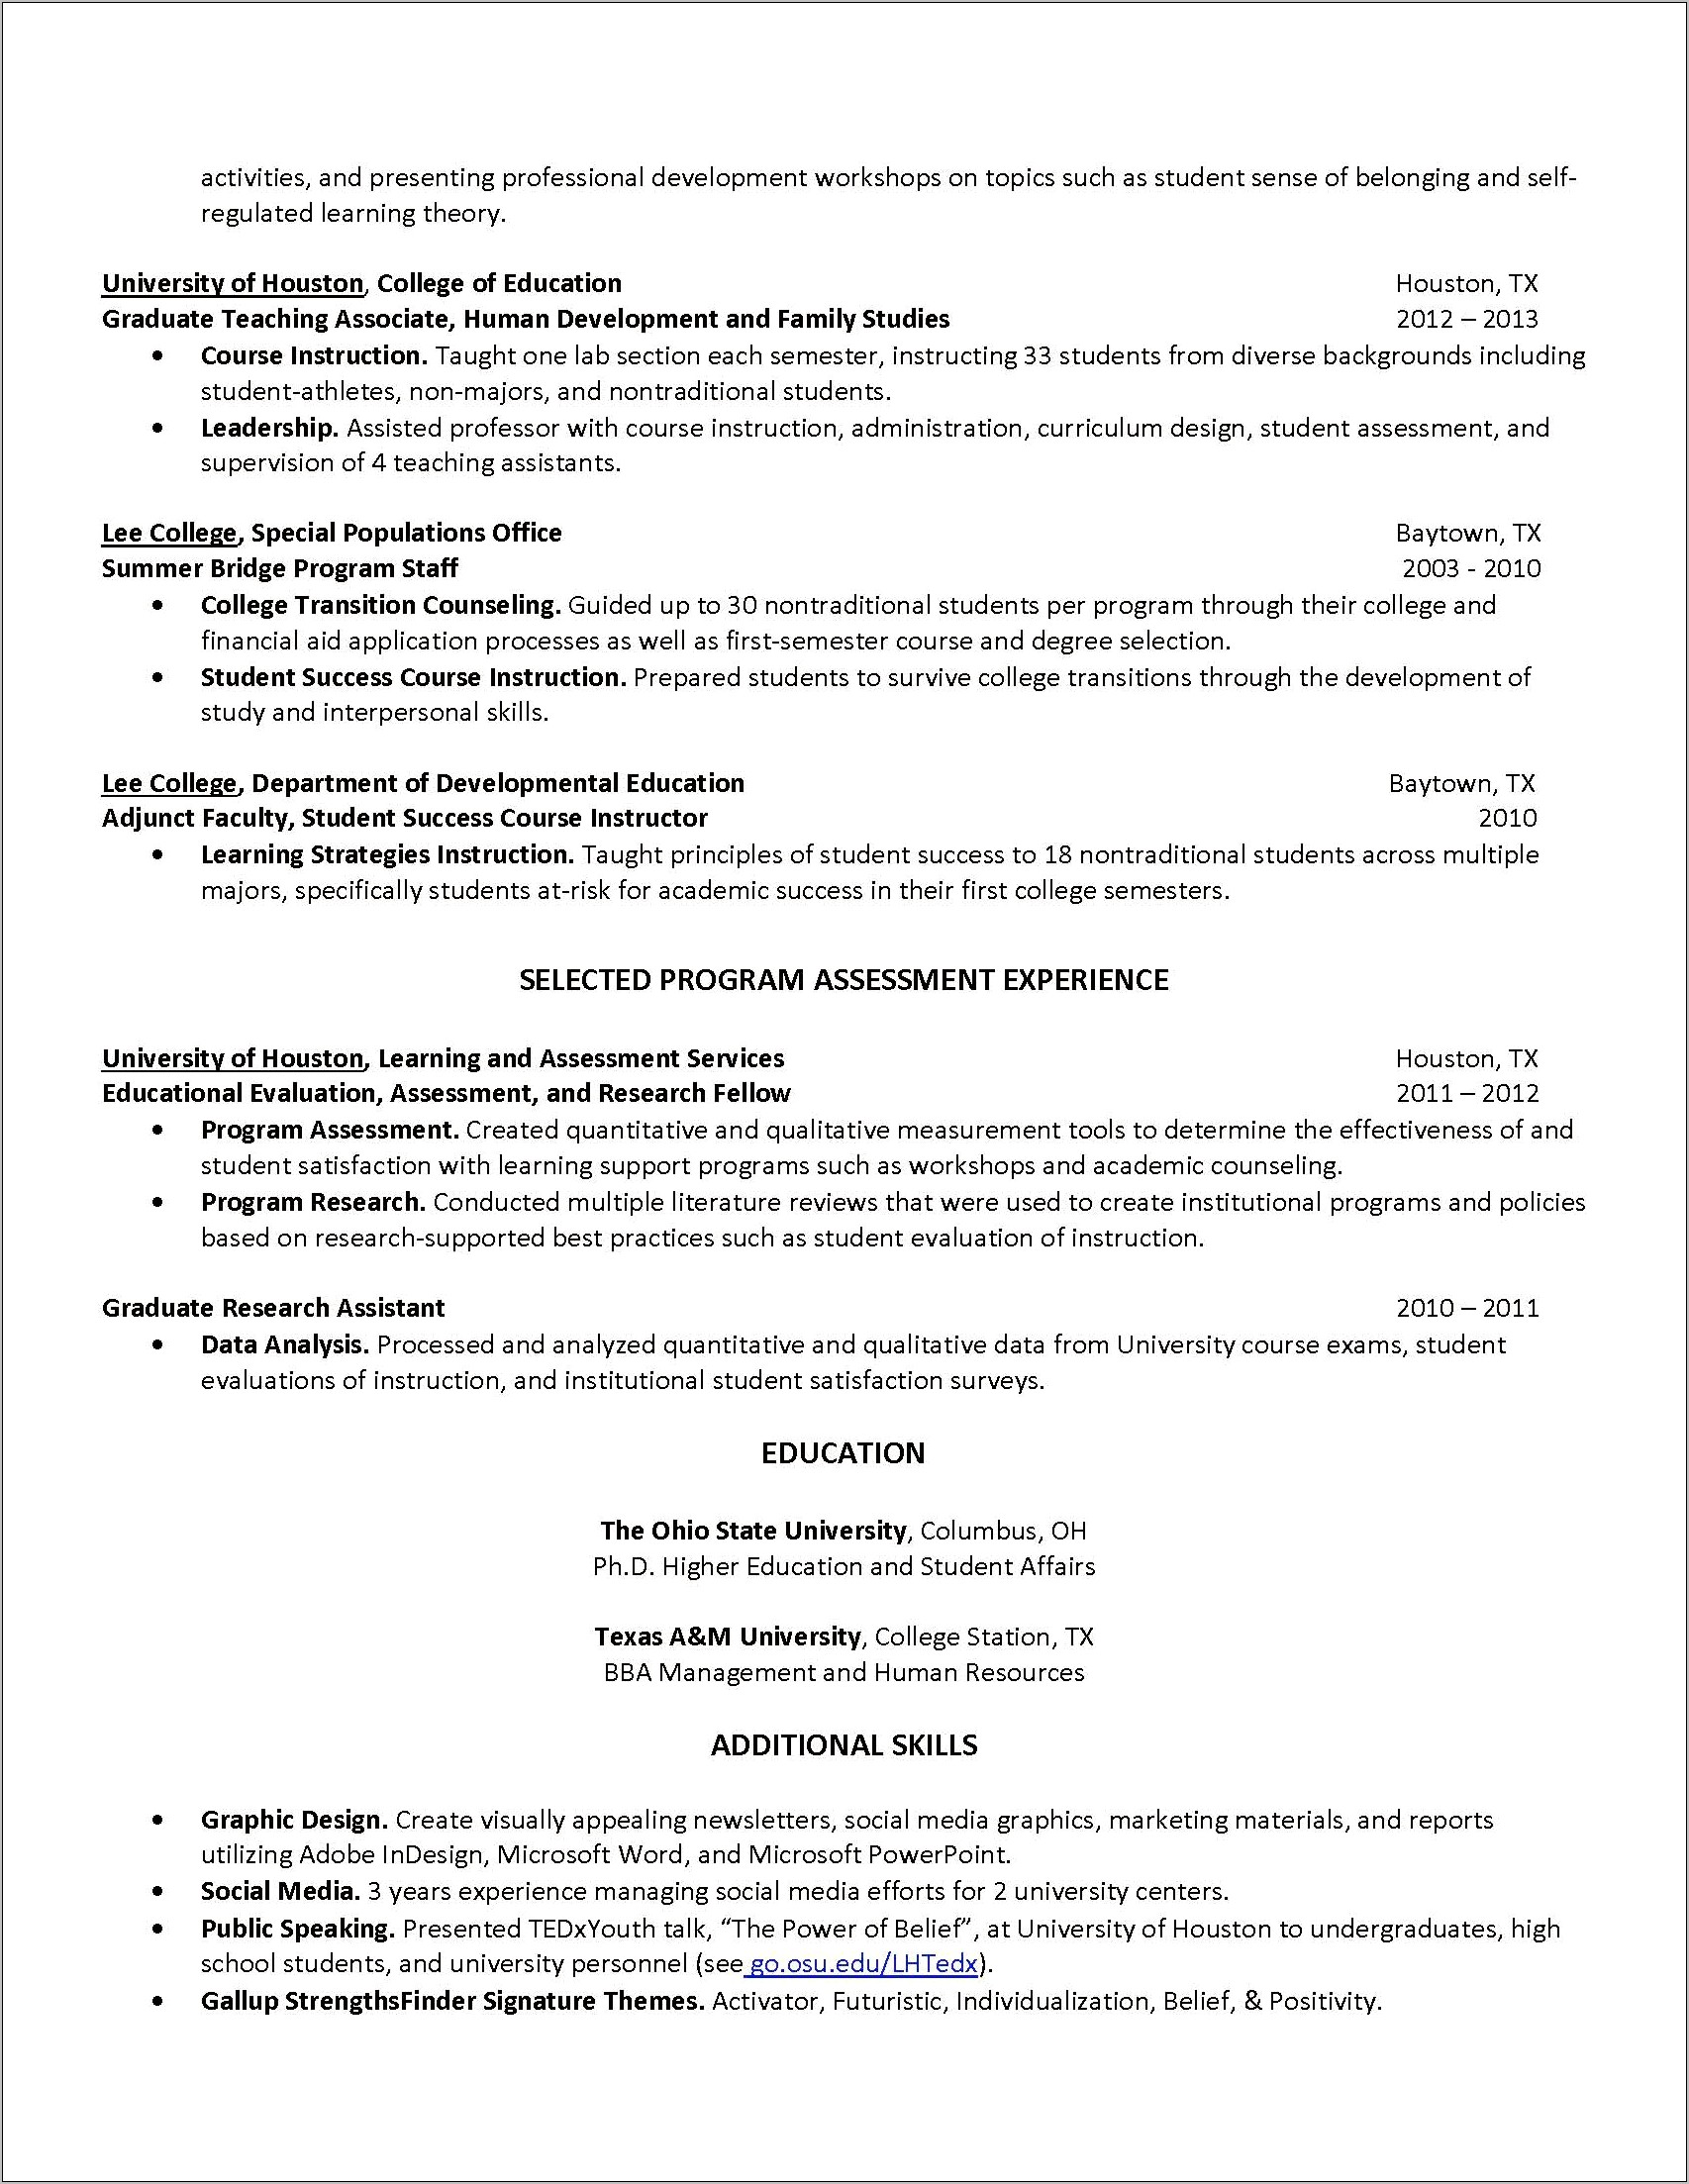 Resume And Cover Letter Workshop Project Ideas